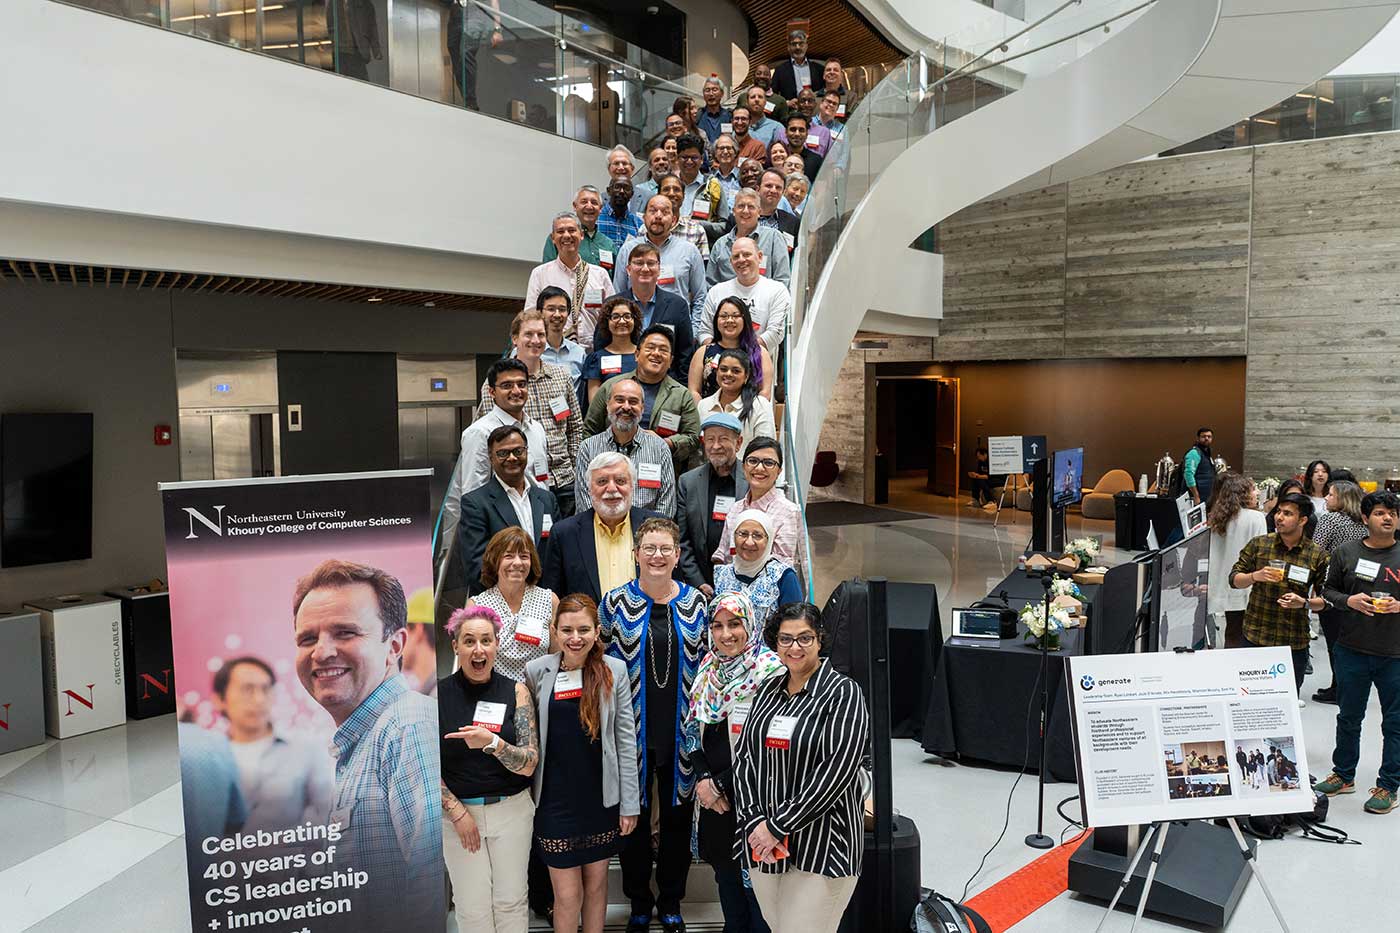 Khoury College faculty gather on the large staircase in the Interdisciplinary Science and Engineering Center. Photo by Ian MacLellan.